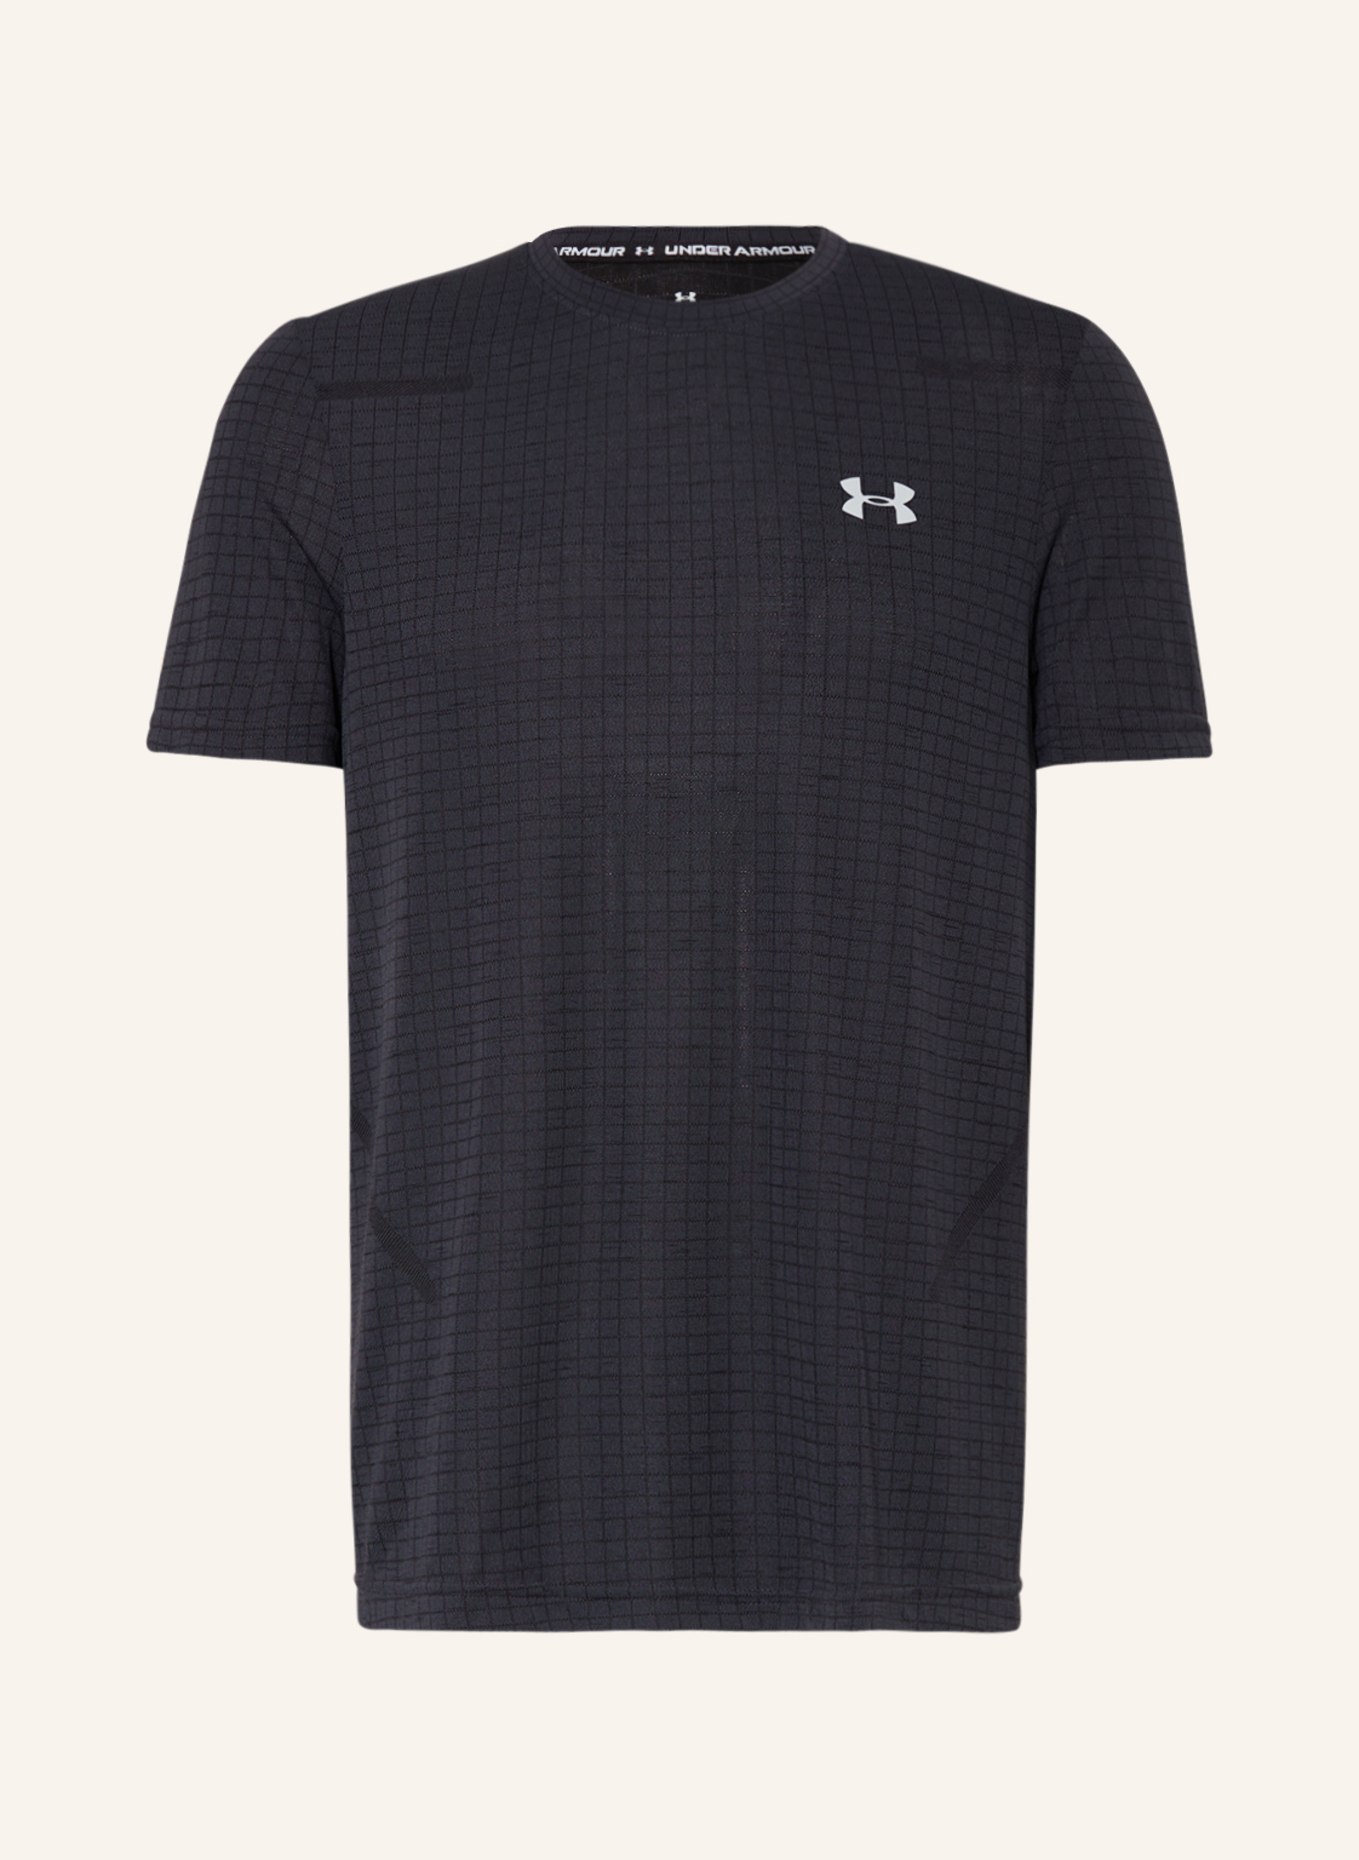 UNDER ARMOUR T-shirt SEAMLESS GRID with mesh, Color: BLACK (Image 1)